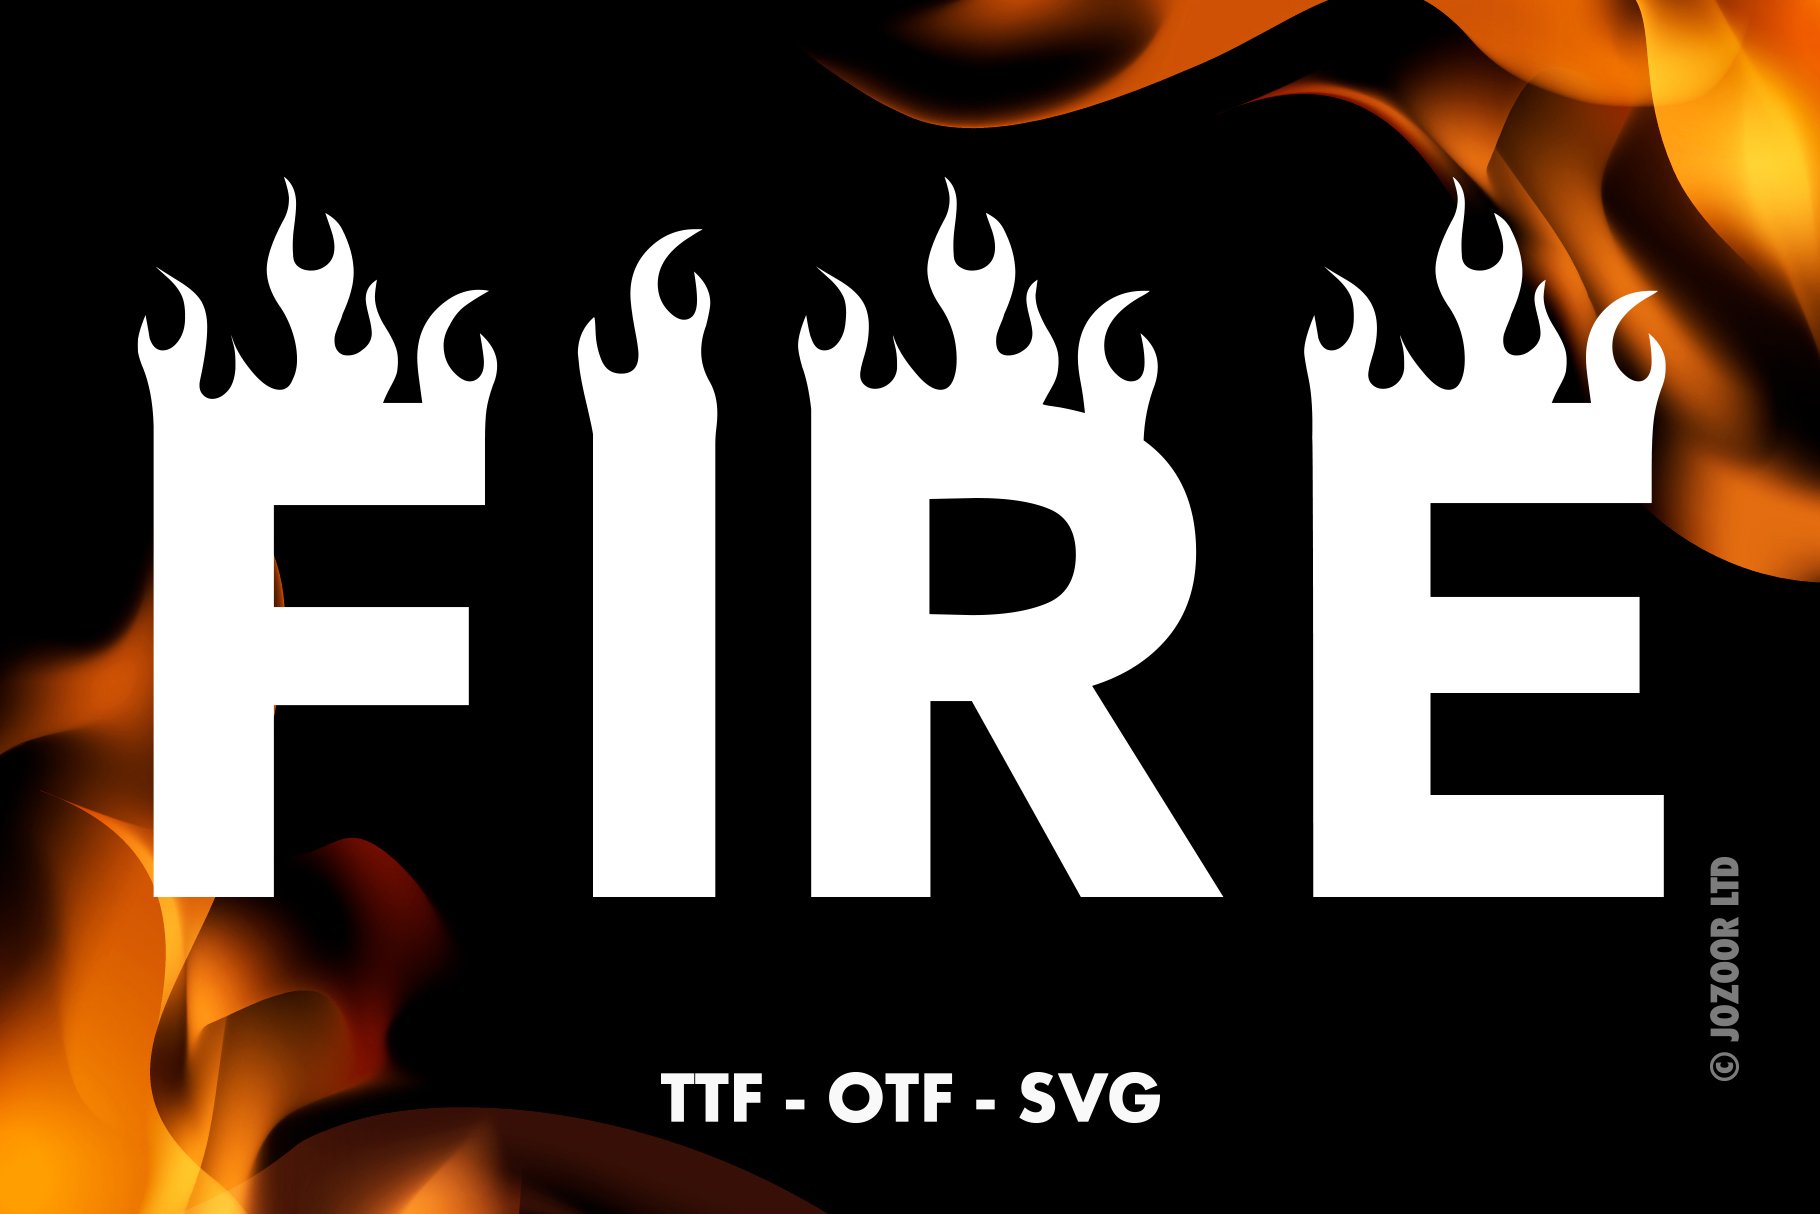 Fire Font cover image.